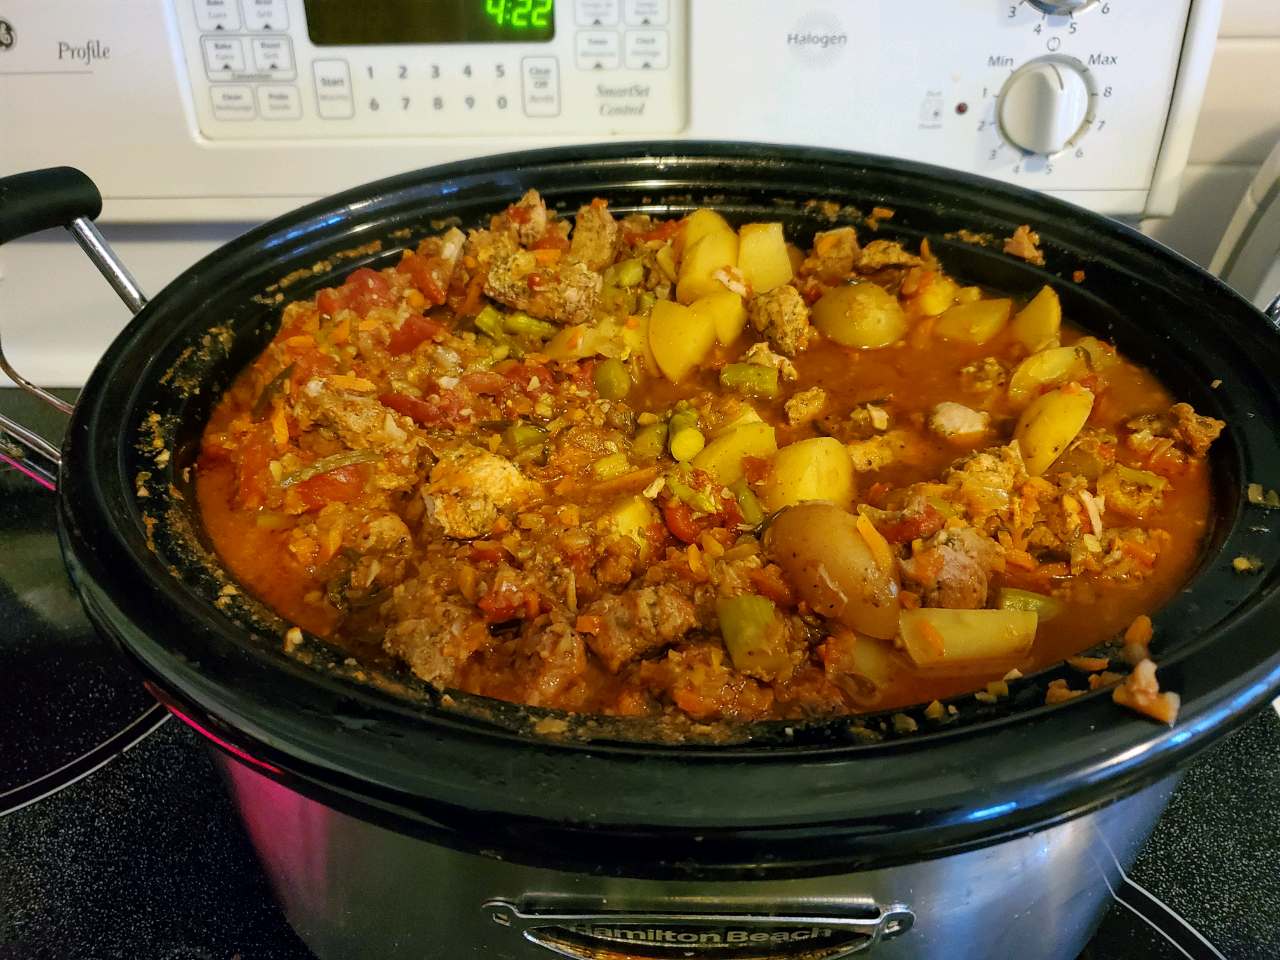 I M Stewing Well Actually I Have Been Making A Pork Stew All Day For Many Canadians A Hearty Stew Is A Winter Food Typically Made In A Andrew H S Moment On